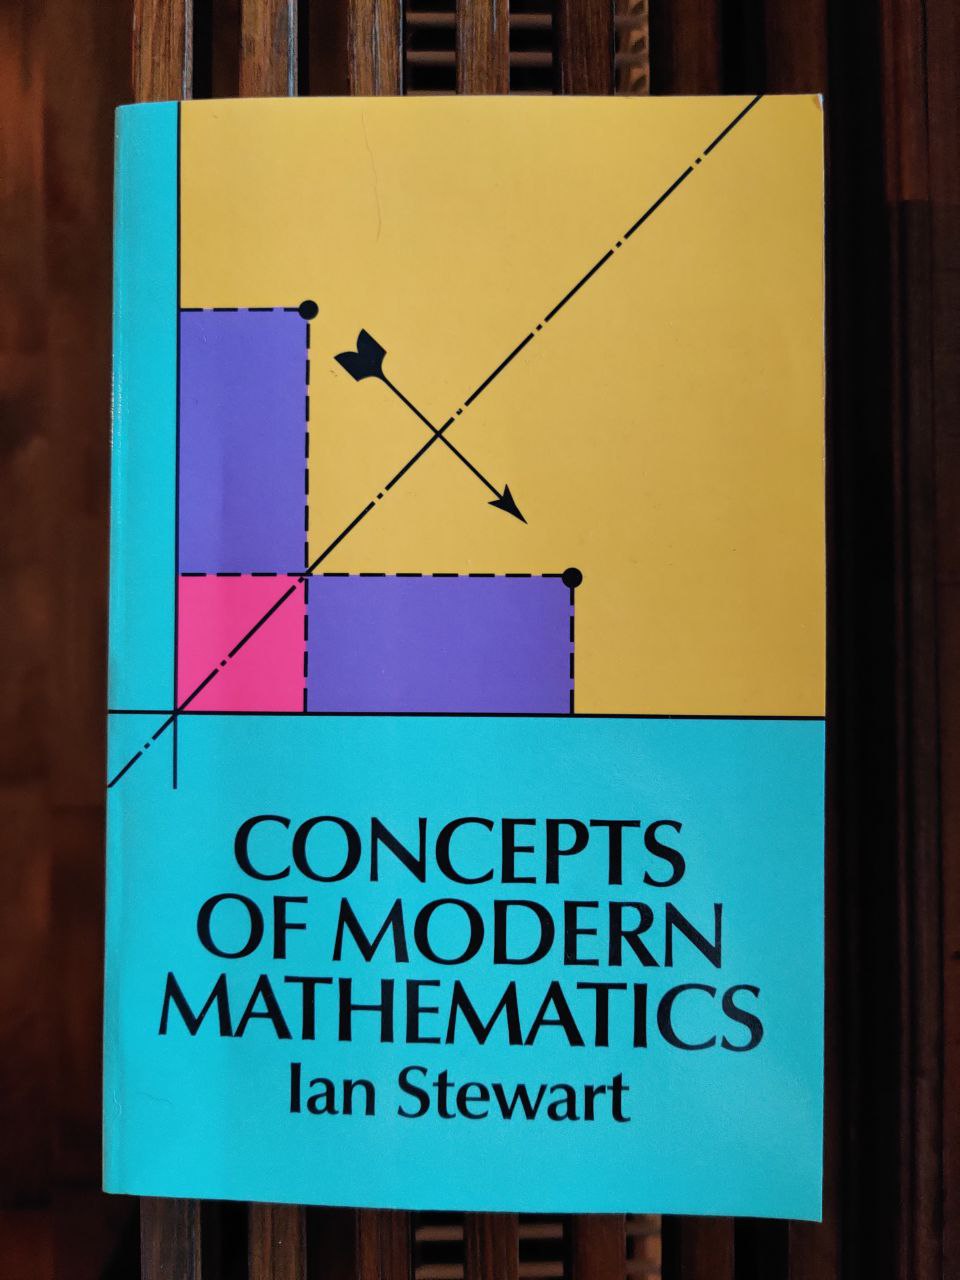 “Concepts of Modern Mathematics” cover